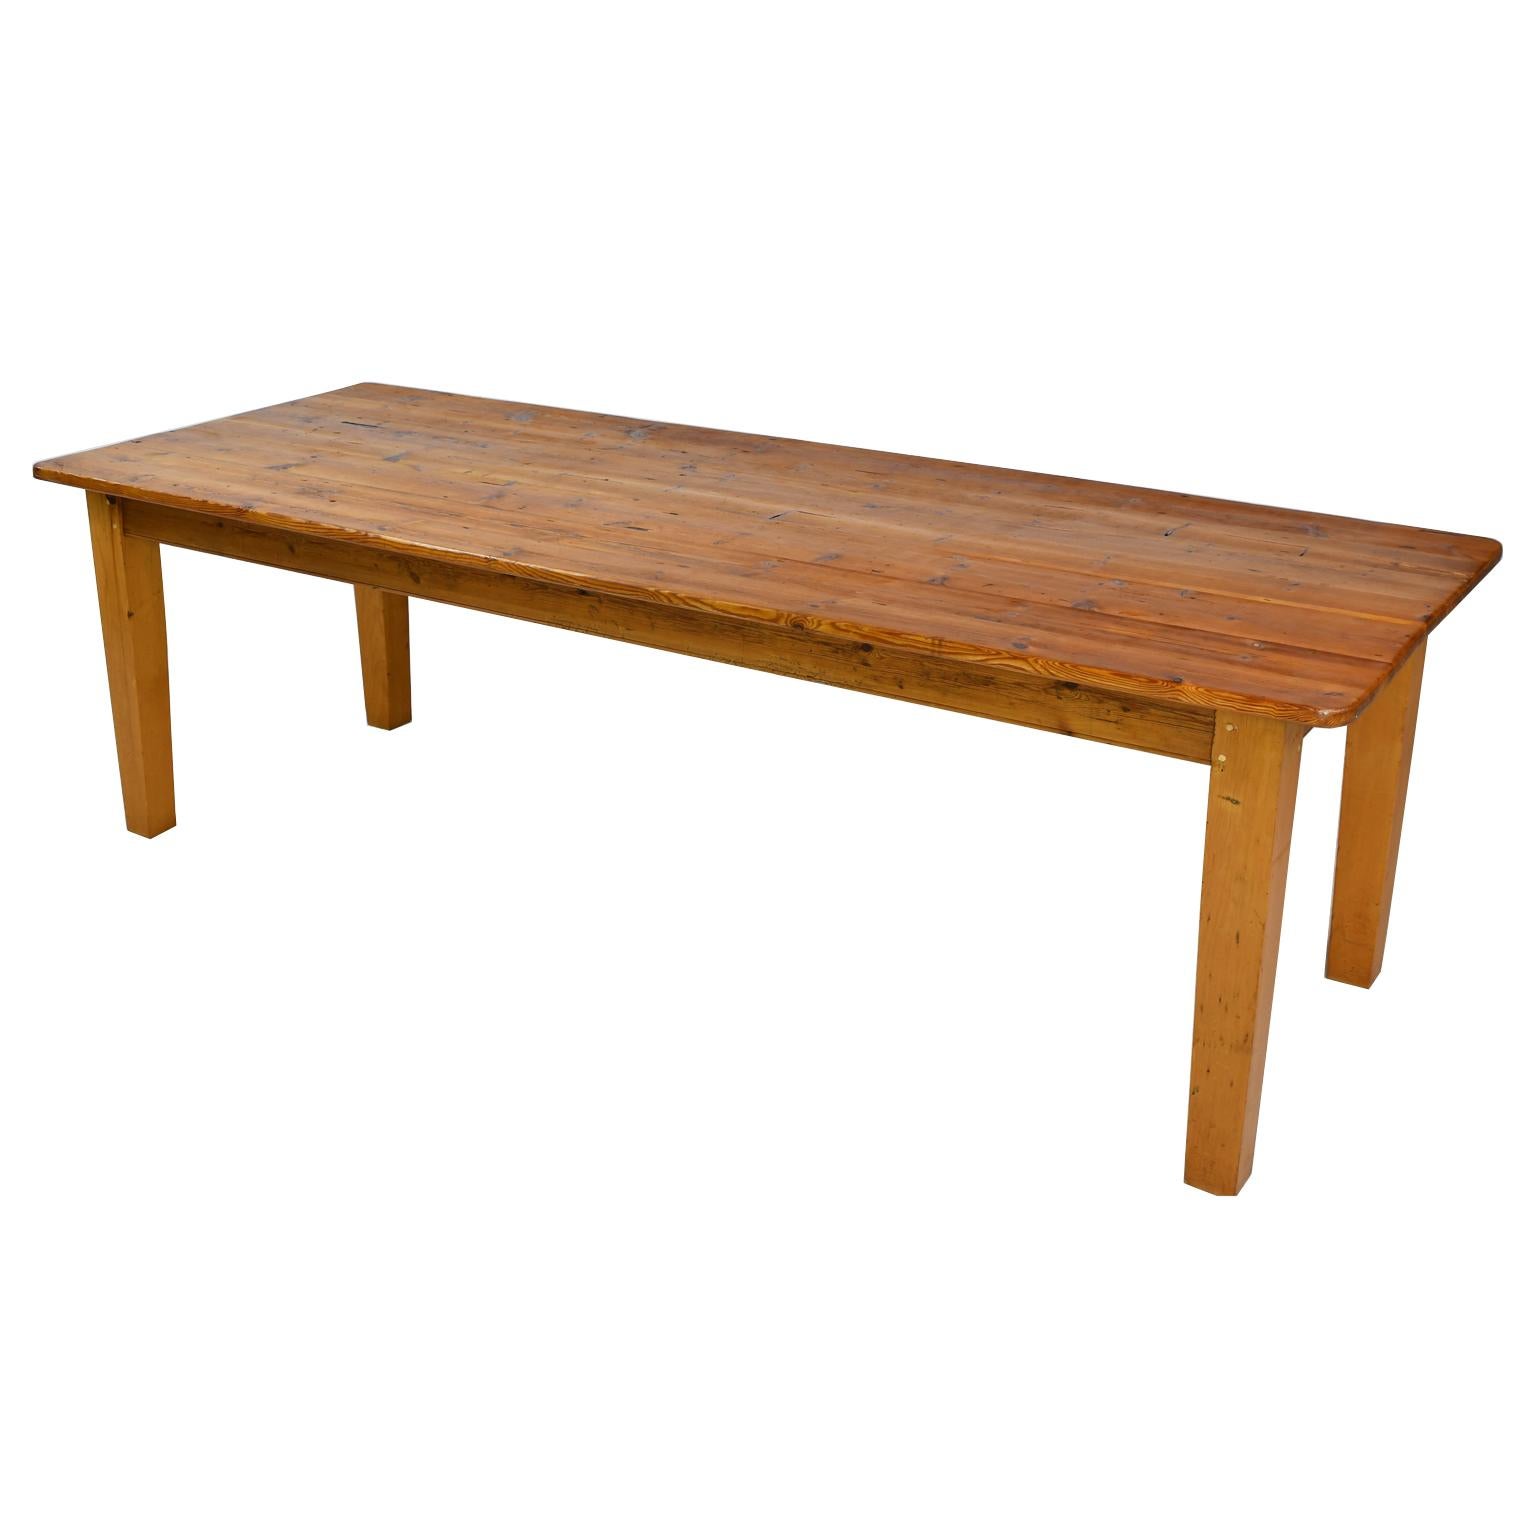 Hand-Crafted Long English Pine Farmhouse Dining Table with Tapered Legs and Antique Plank Top